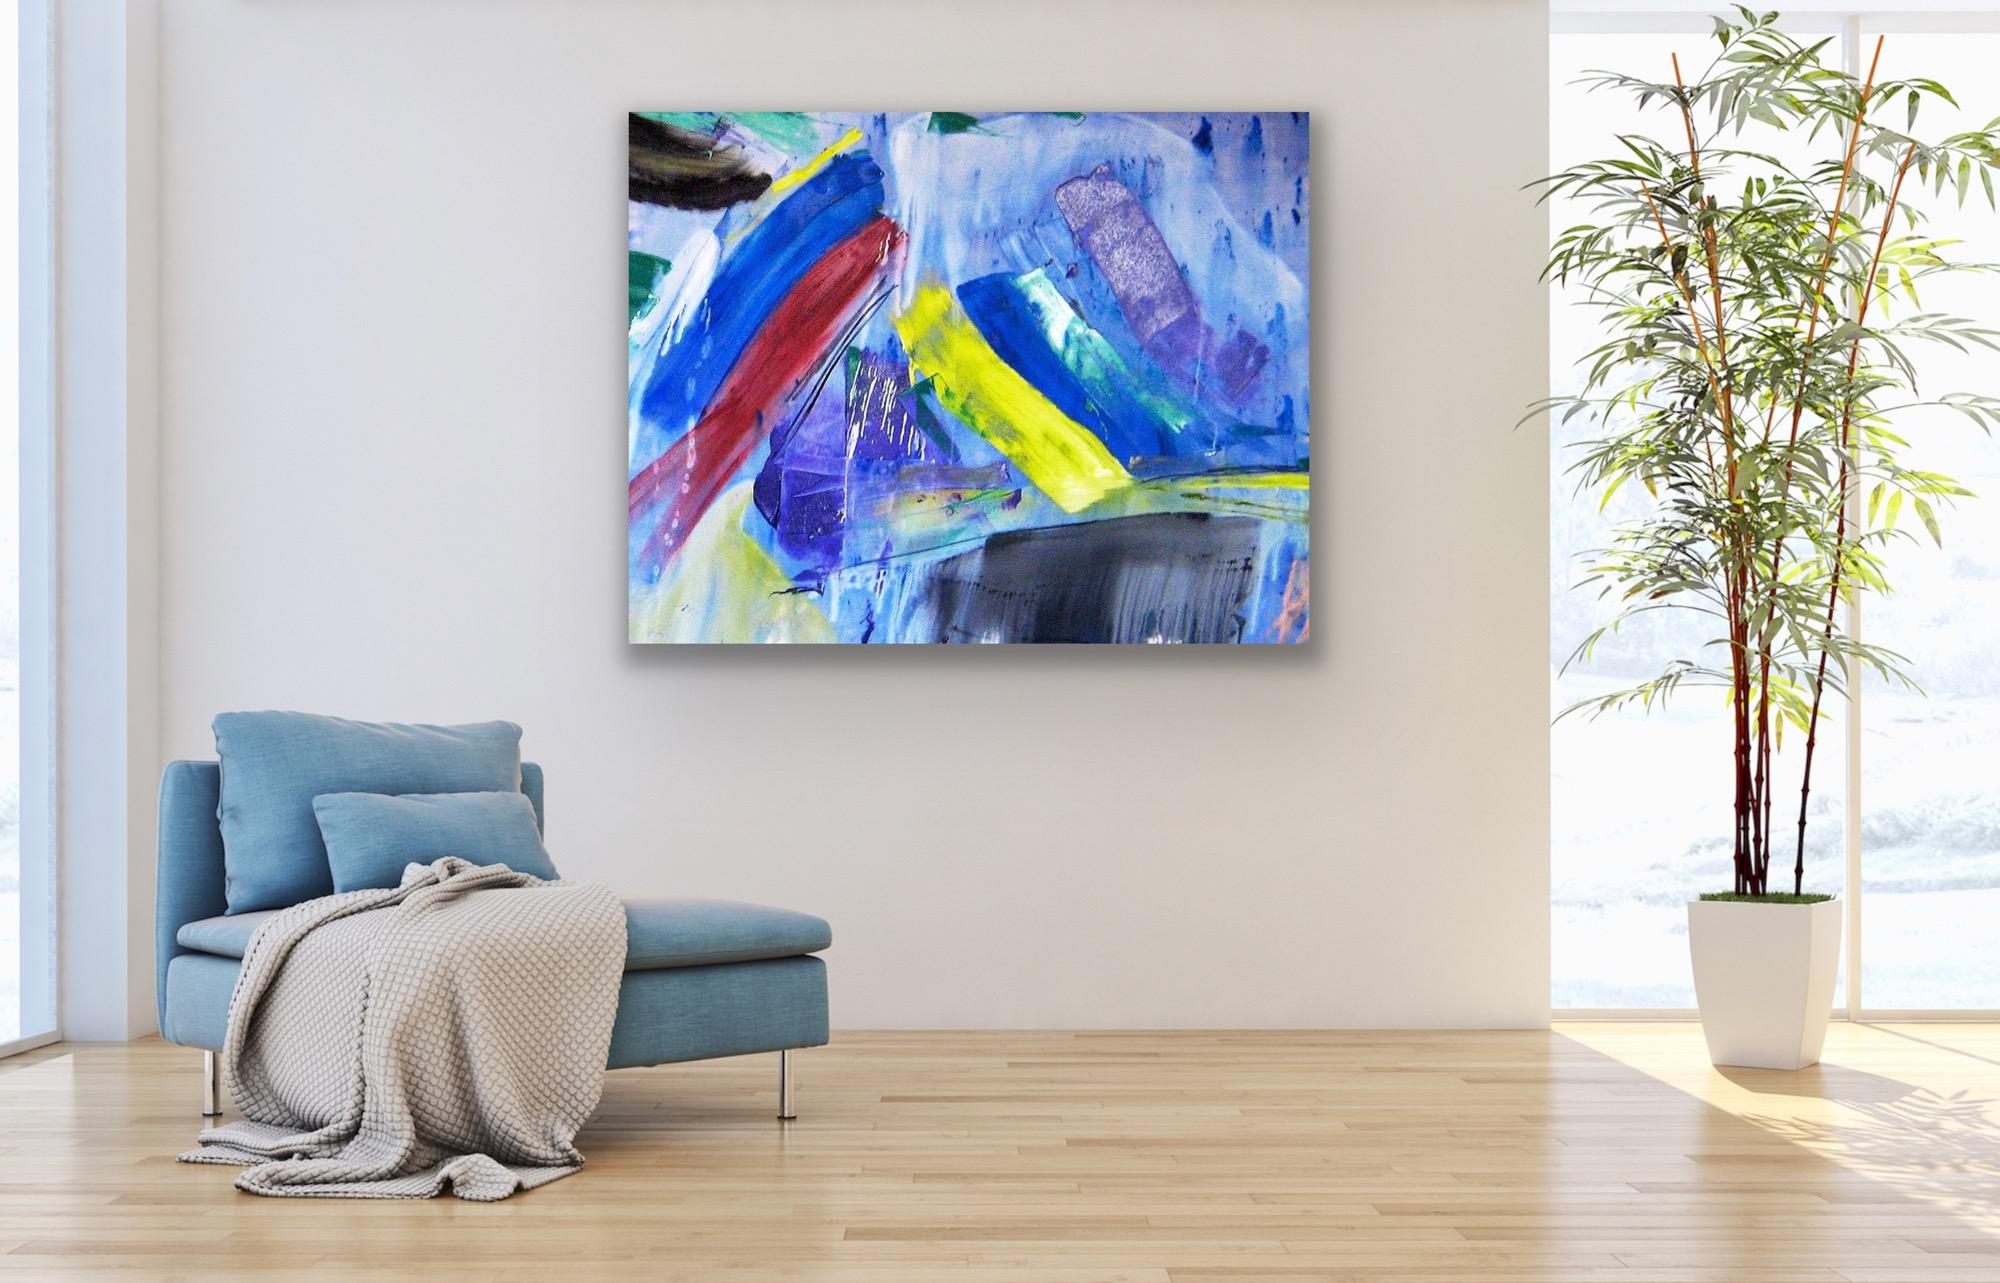 Caspian Rain - Abstract Expressionist Painting by Francine Tint